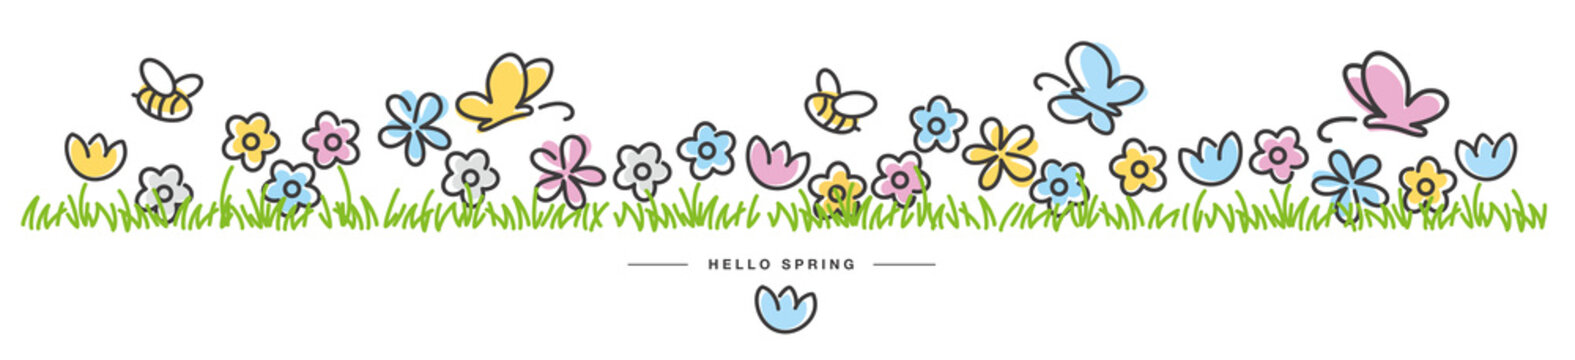 Spring background design with bees, butterflies and colorful spring flowers in green grass white isolated